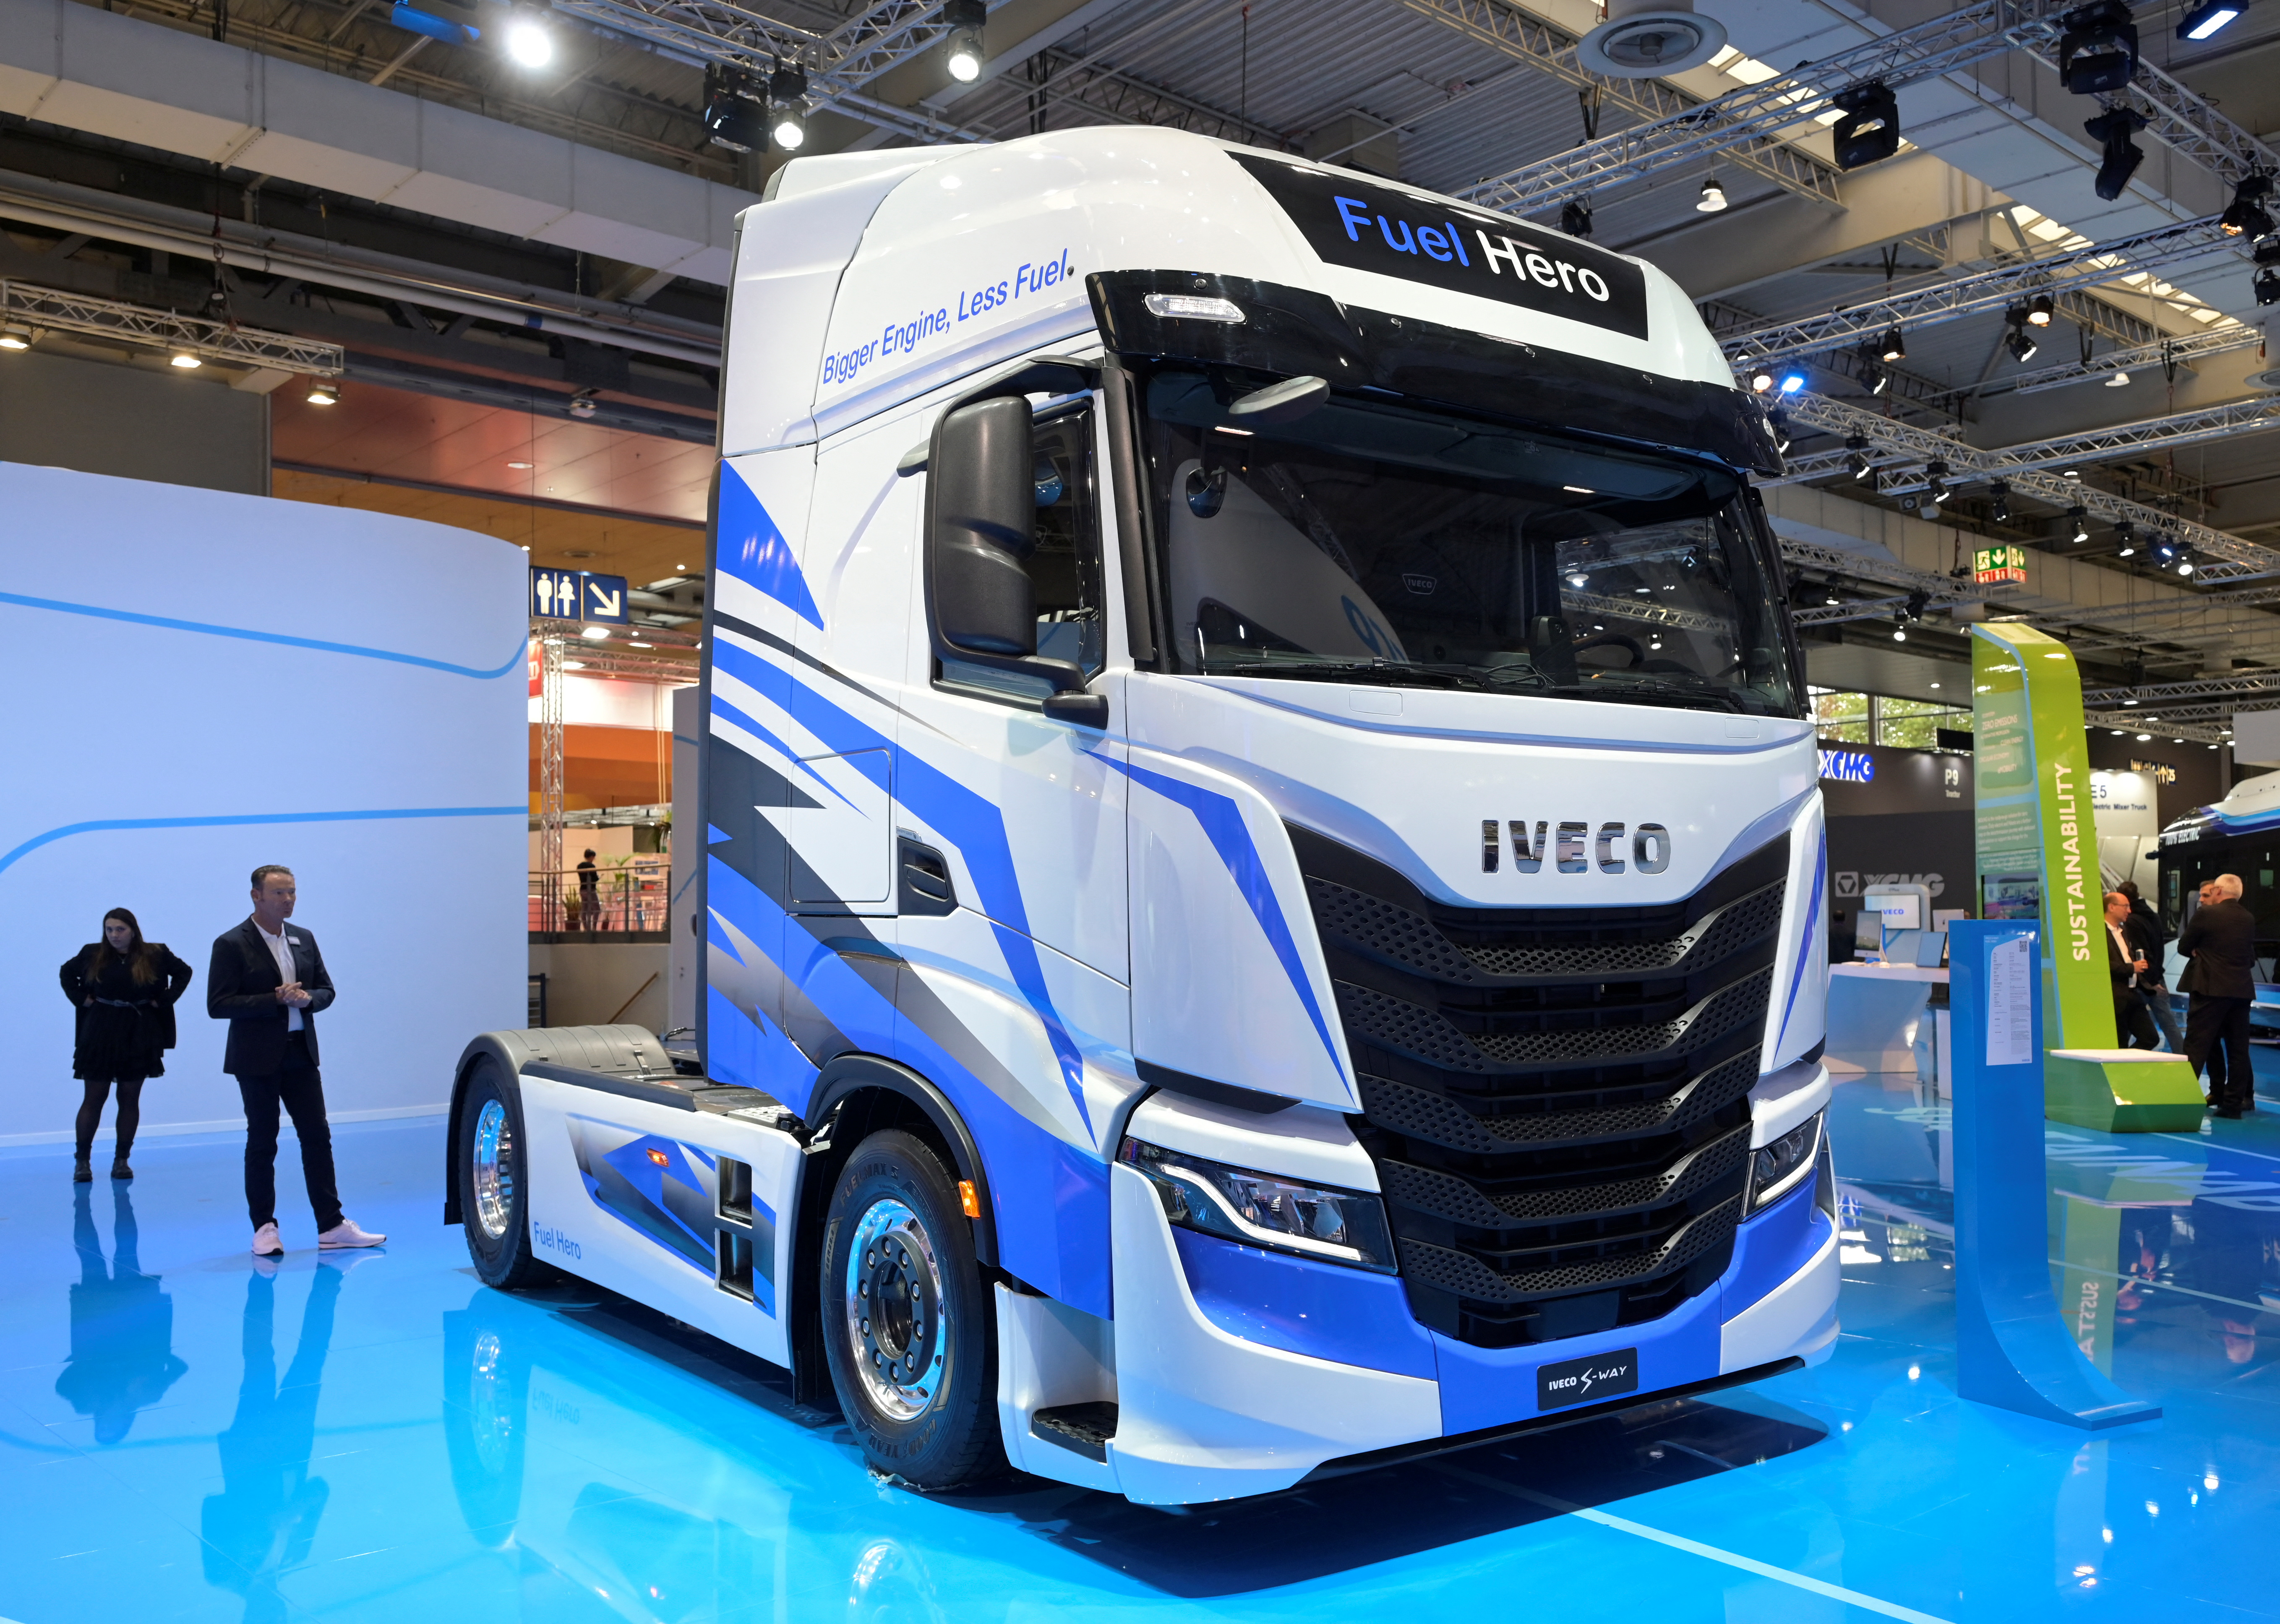 Iveco sees profit boost from strong order backlog